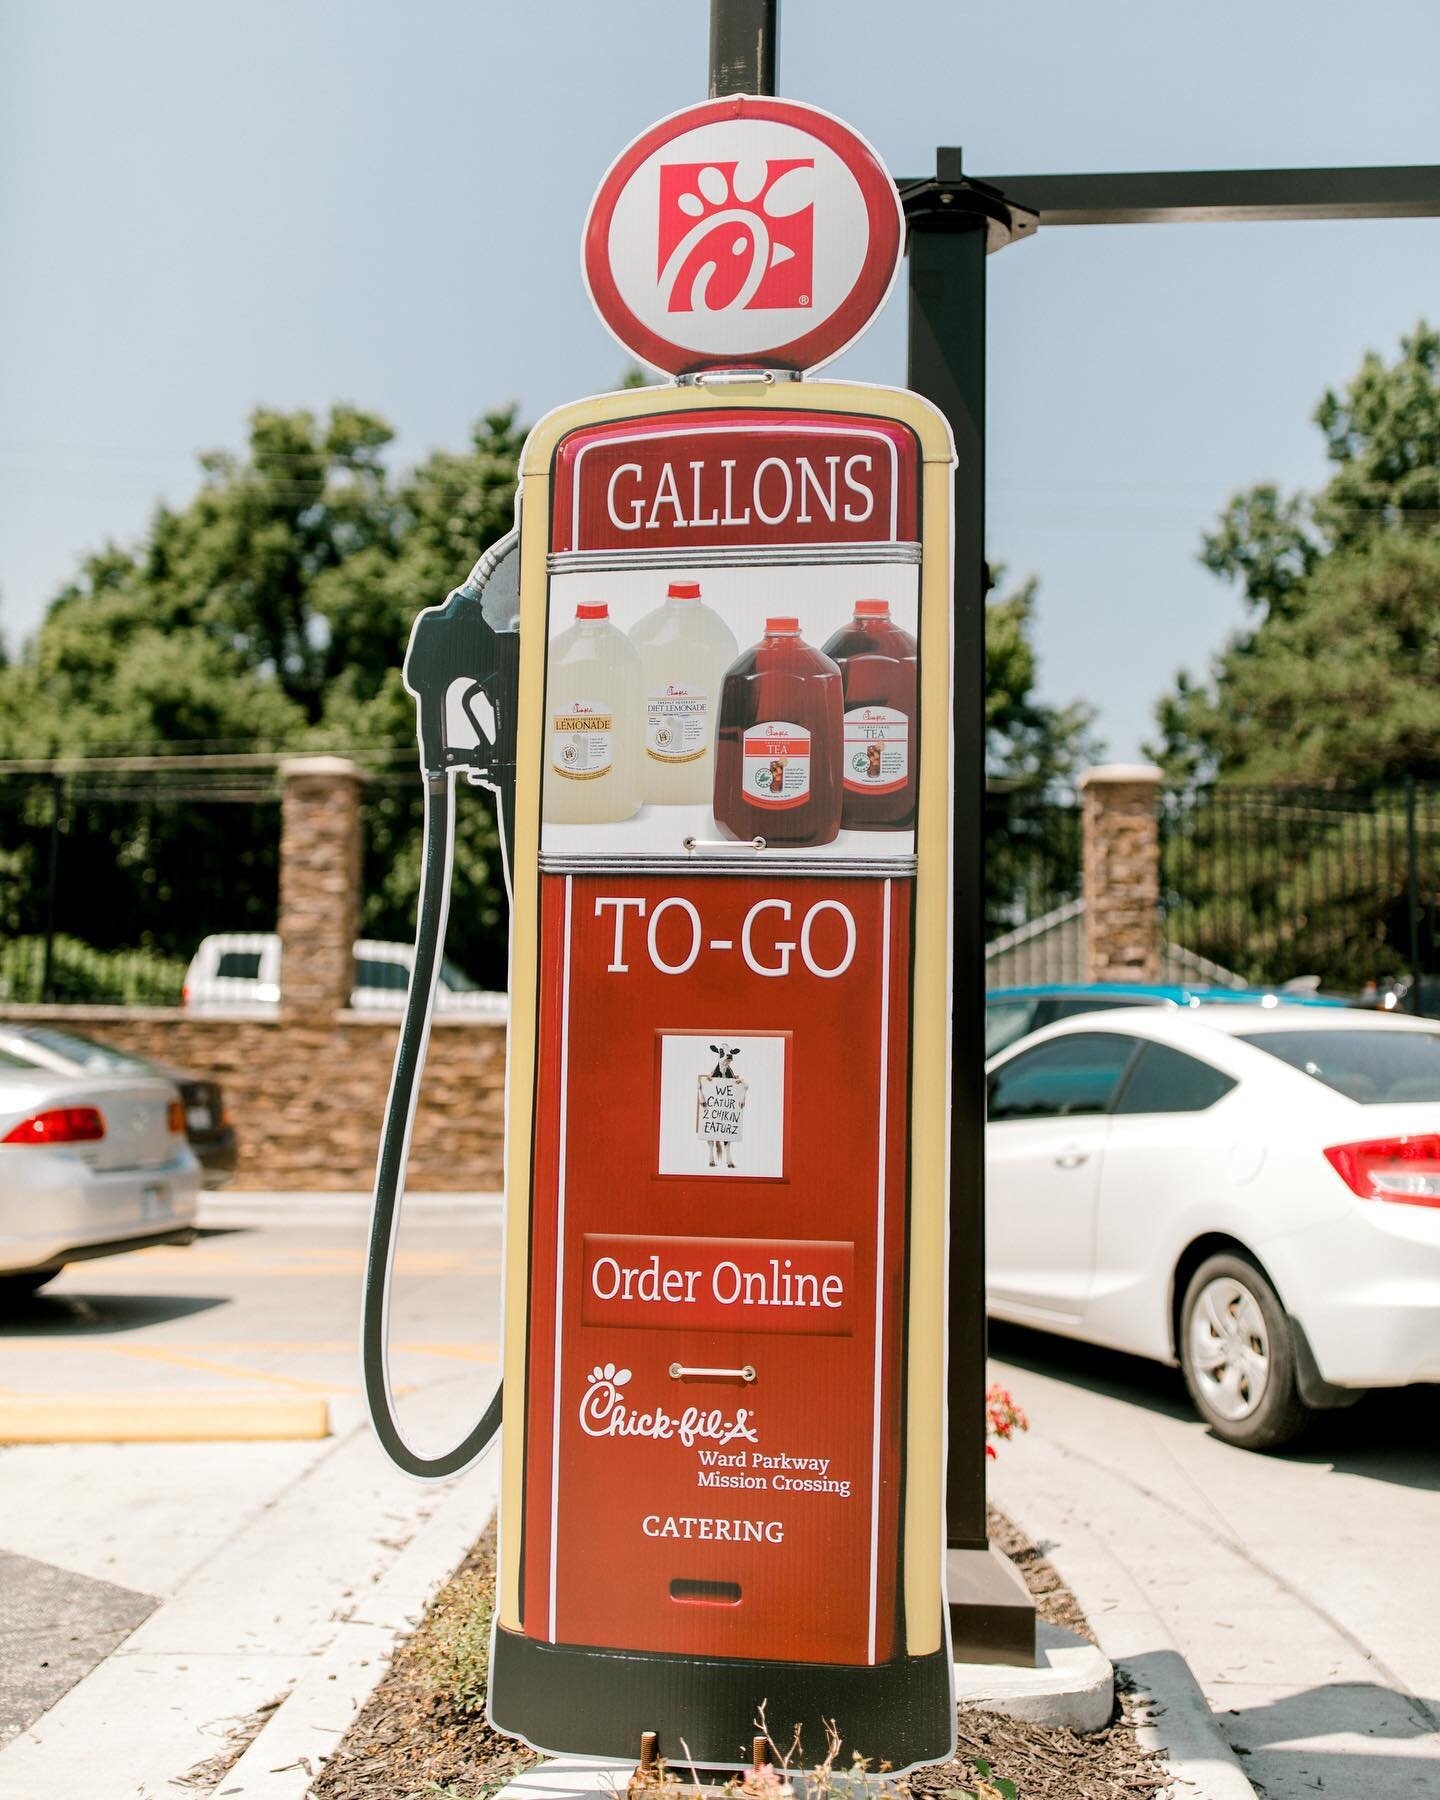 Gallons to go! Come fill up at CFA next time you&rsquo;re needing a gallon of our Chick-fil-A Lemonade or Freshly Brewed Tea ⛽️